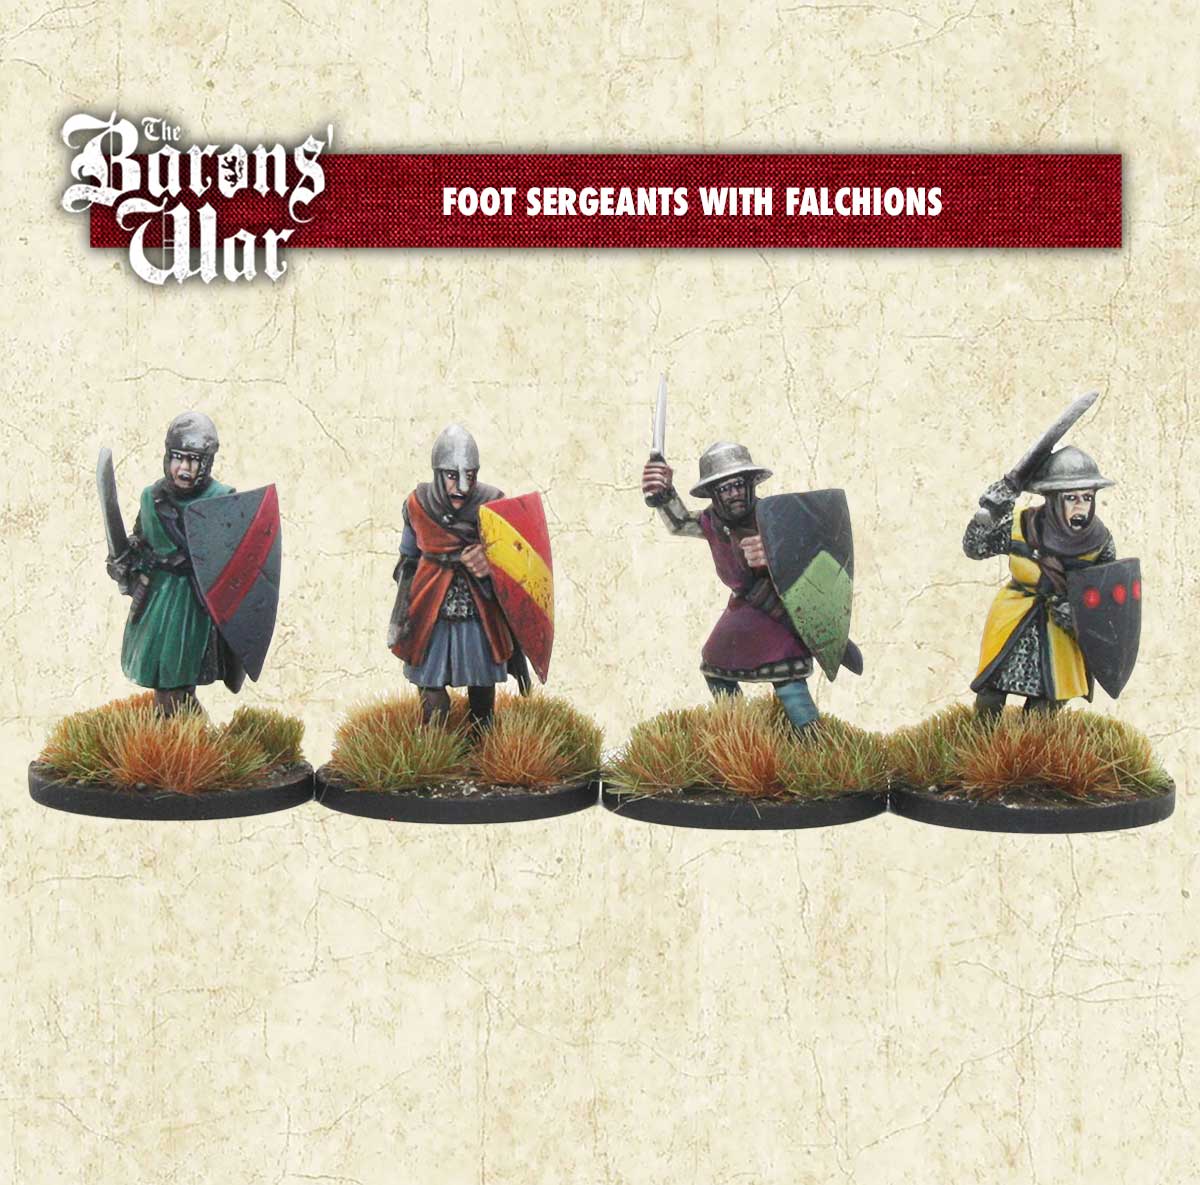 Baron's War Foot Sergeants with Falchions 28mm historical miniatures